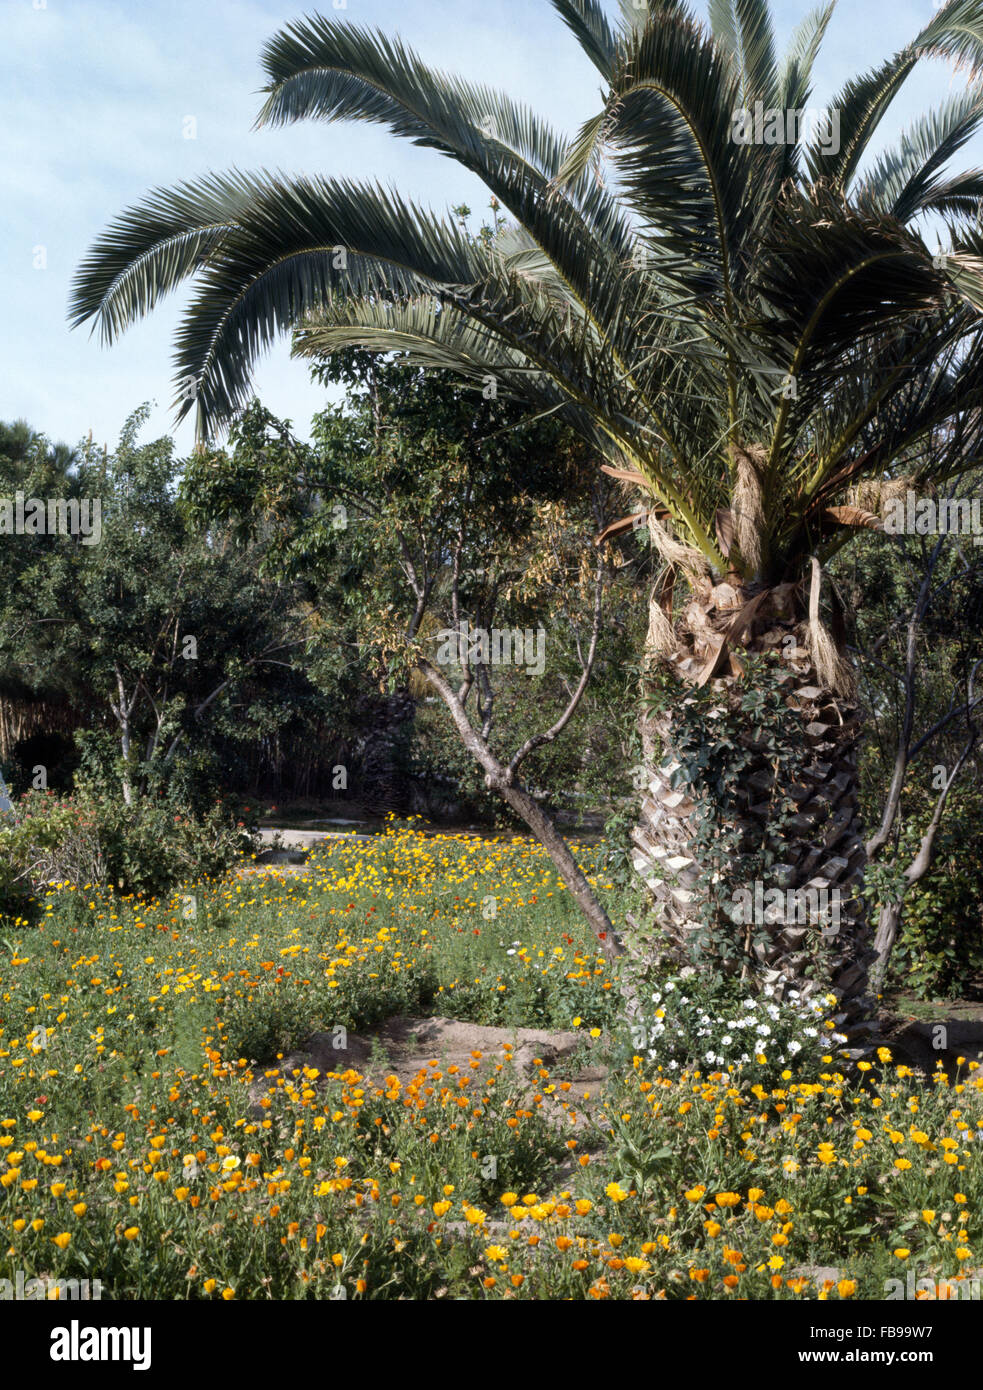 Tall palm tree under-planted with yellow marigolds in a Moroccan garden Stock Photo